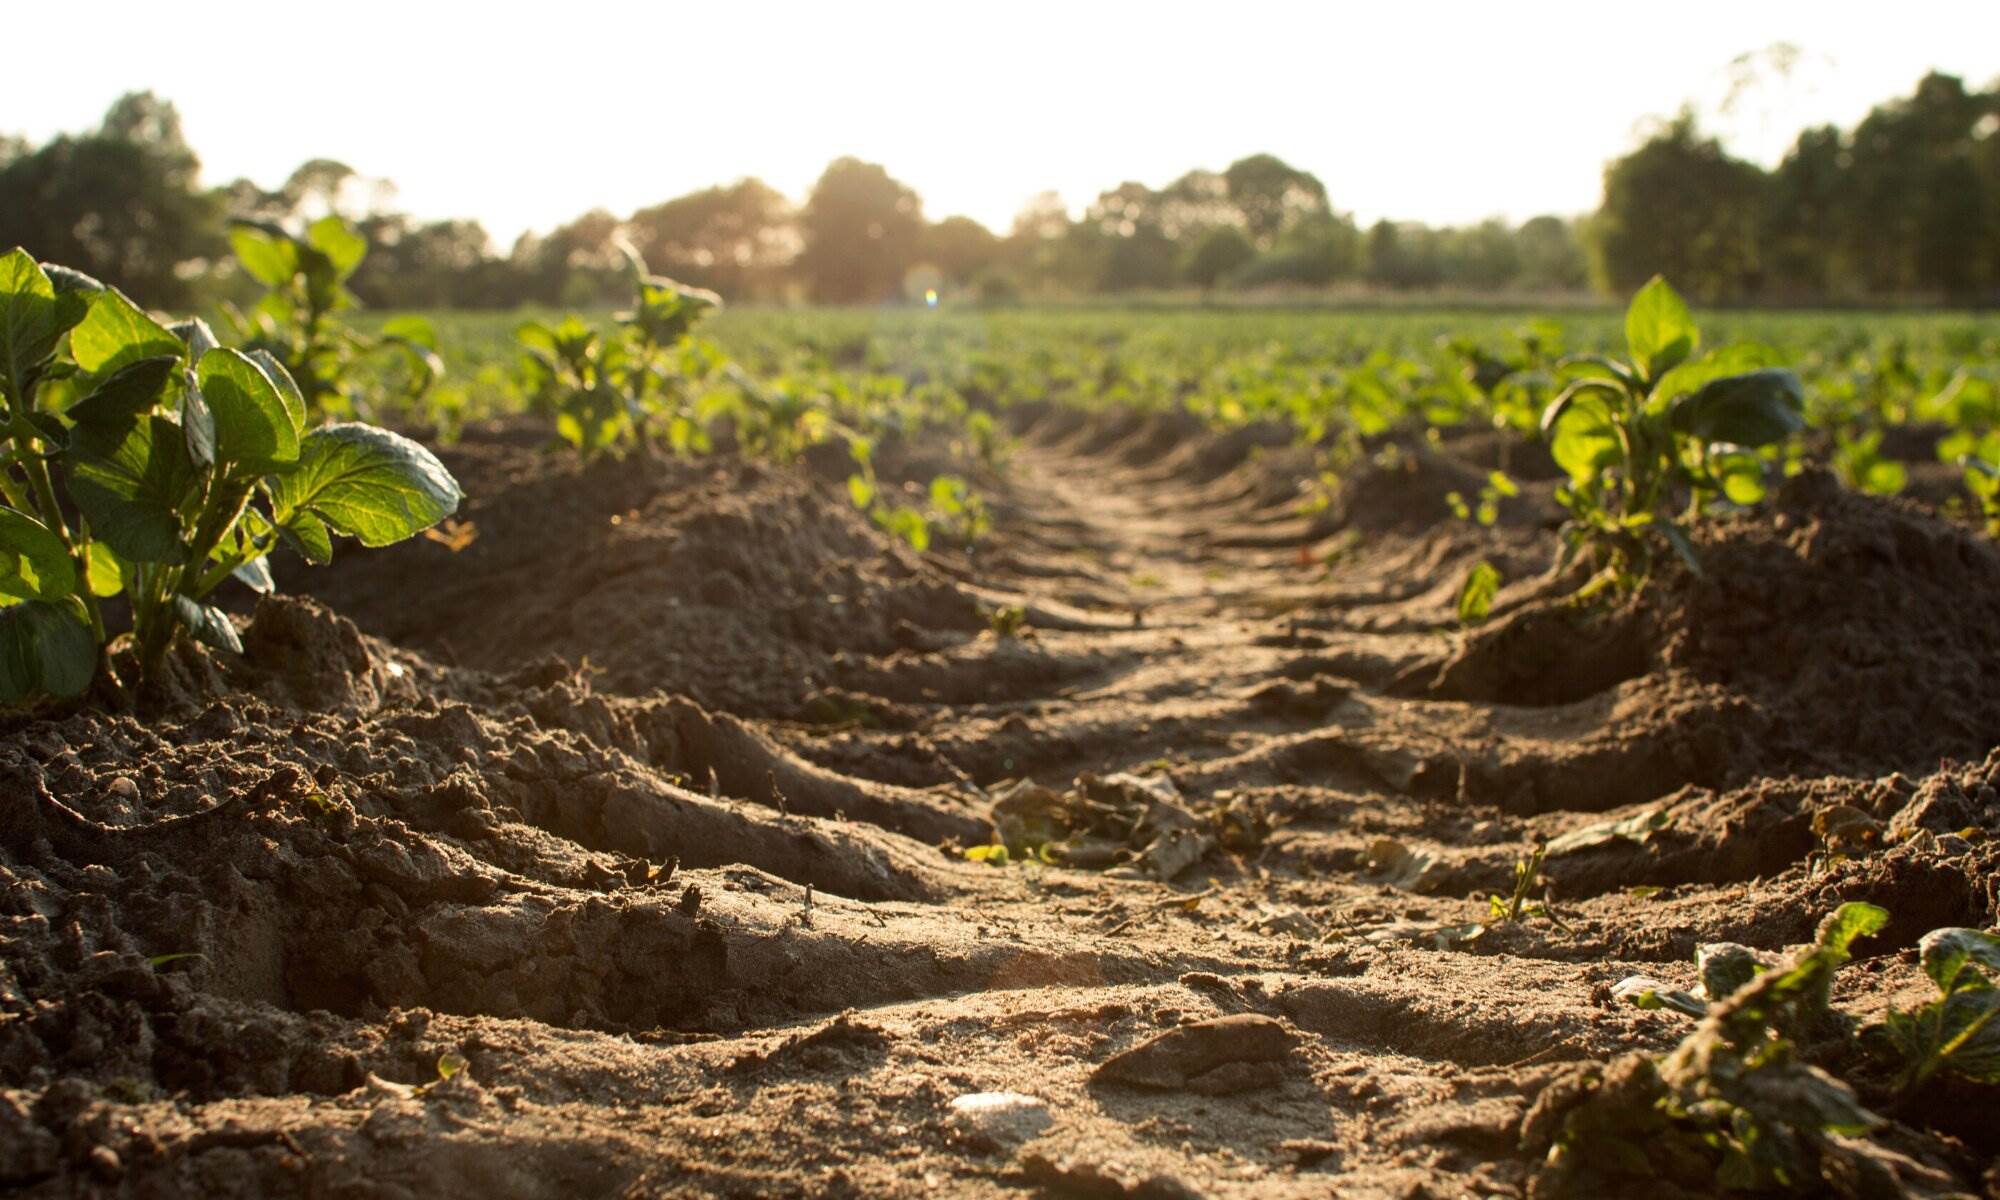 Which Soil Horizon Is The Most Important To Farmers For Planting Crops?